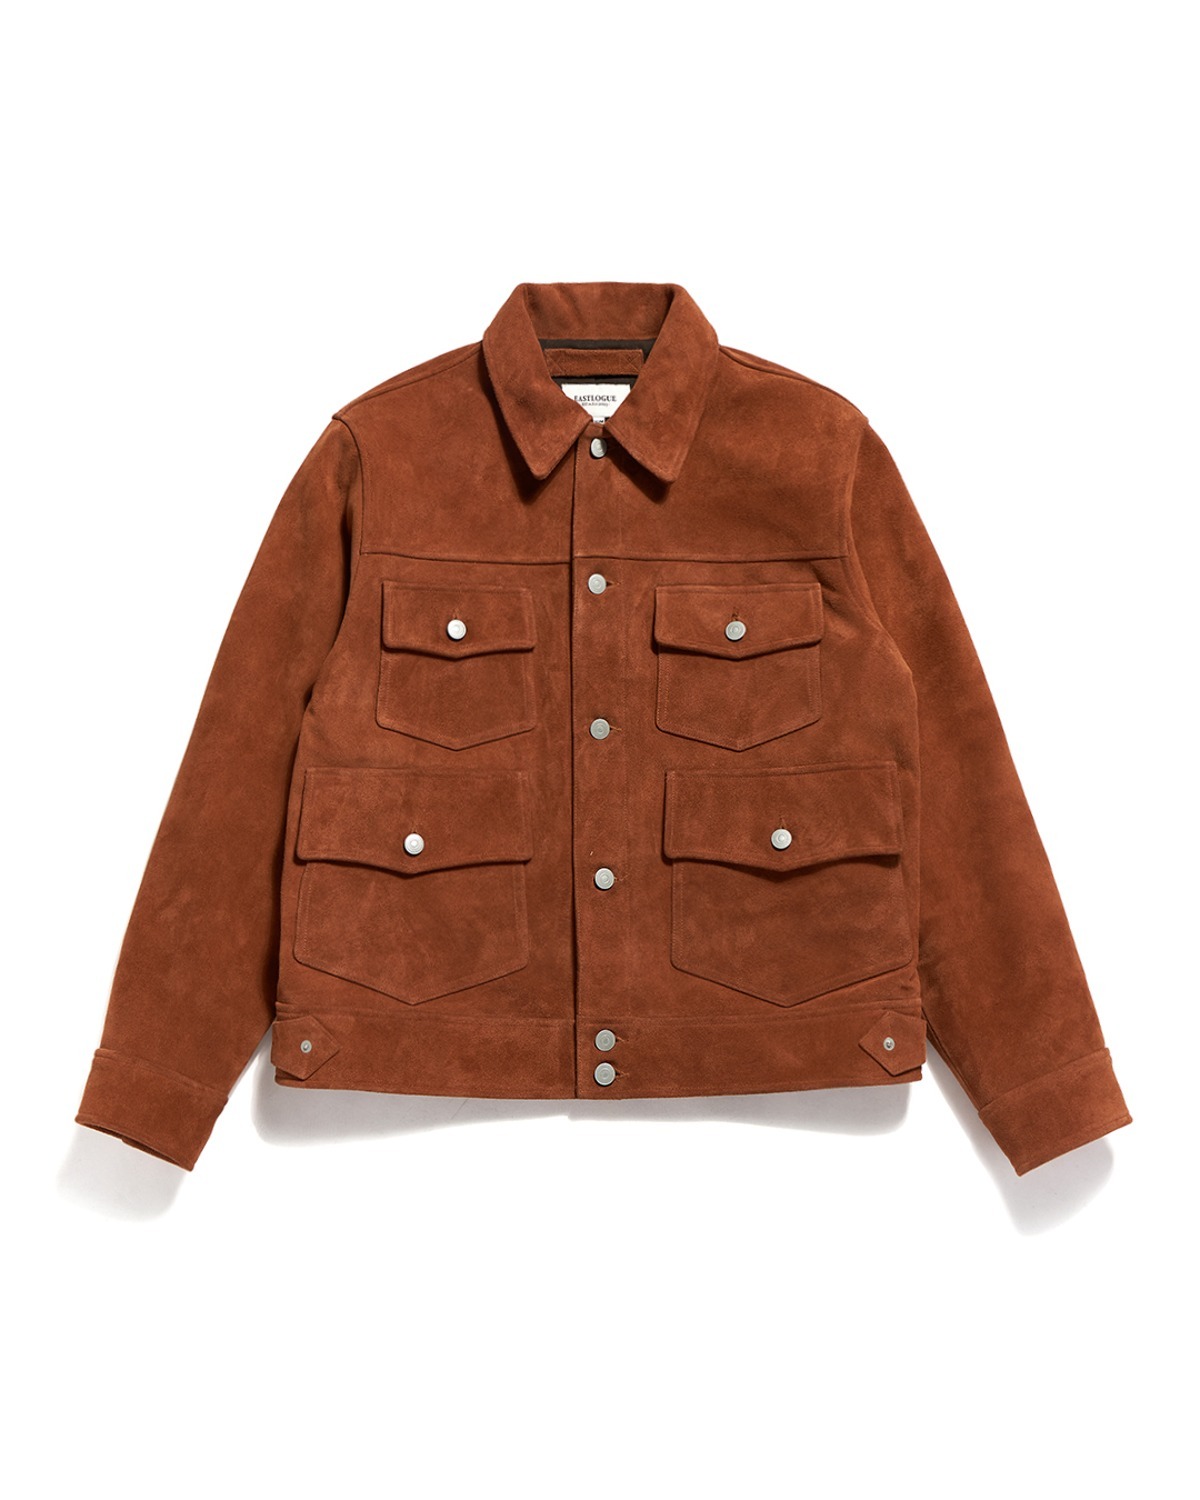 TRAPPER LEATHER JACKET / BROWN